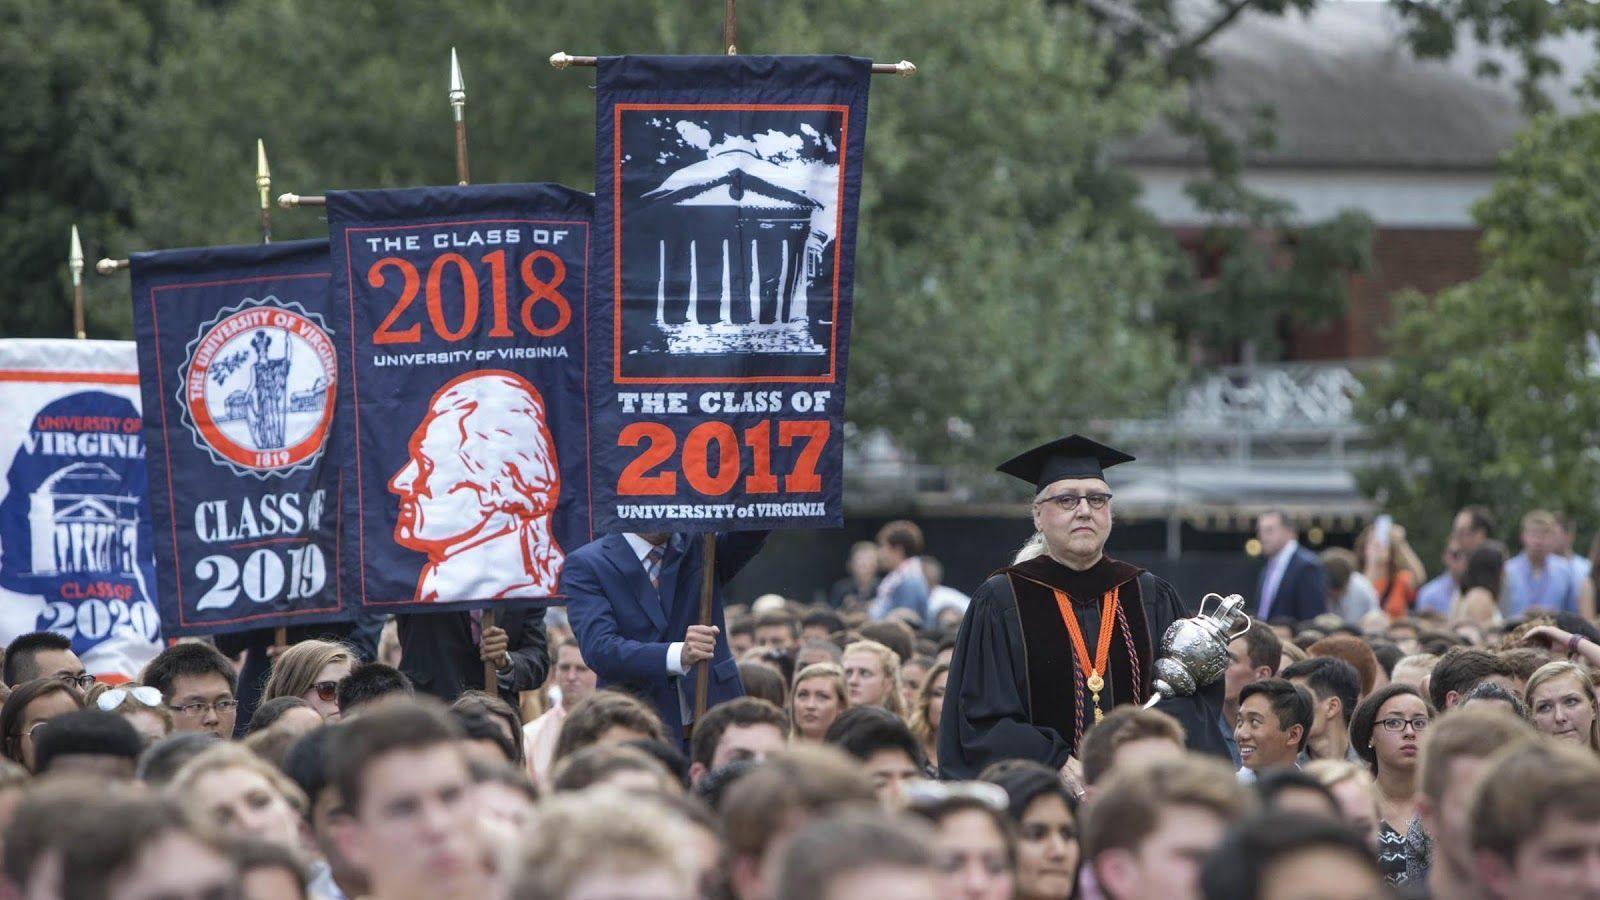 Notes from Peabody: The UVA Application Process